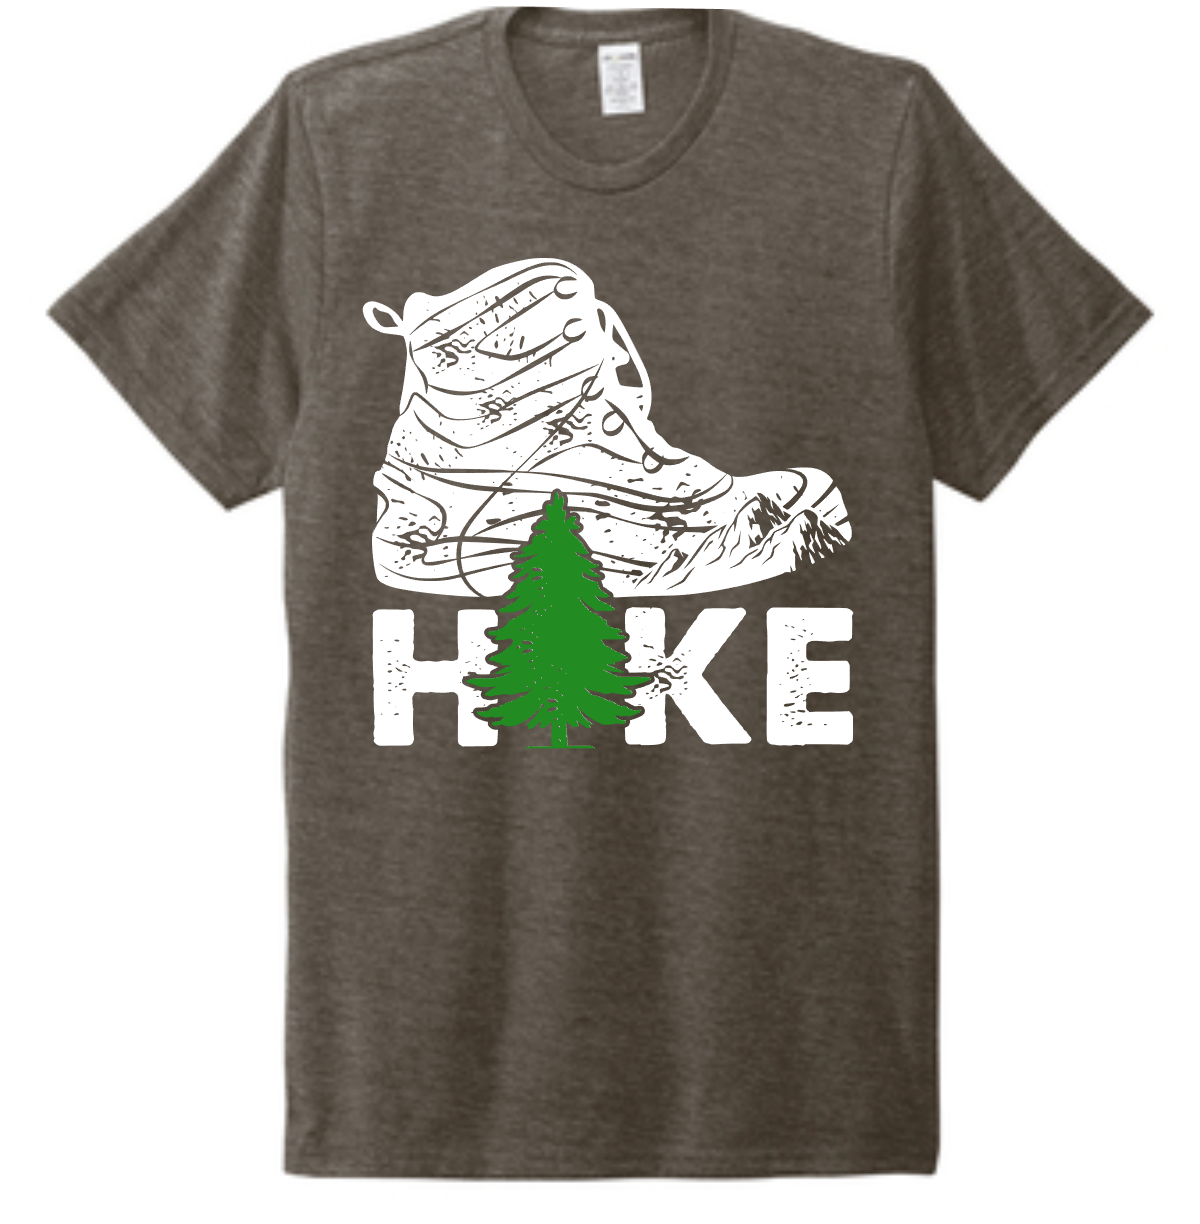 Hike t-shirt for outdoor adventures